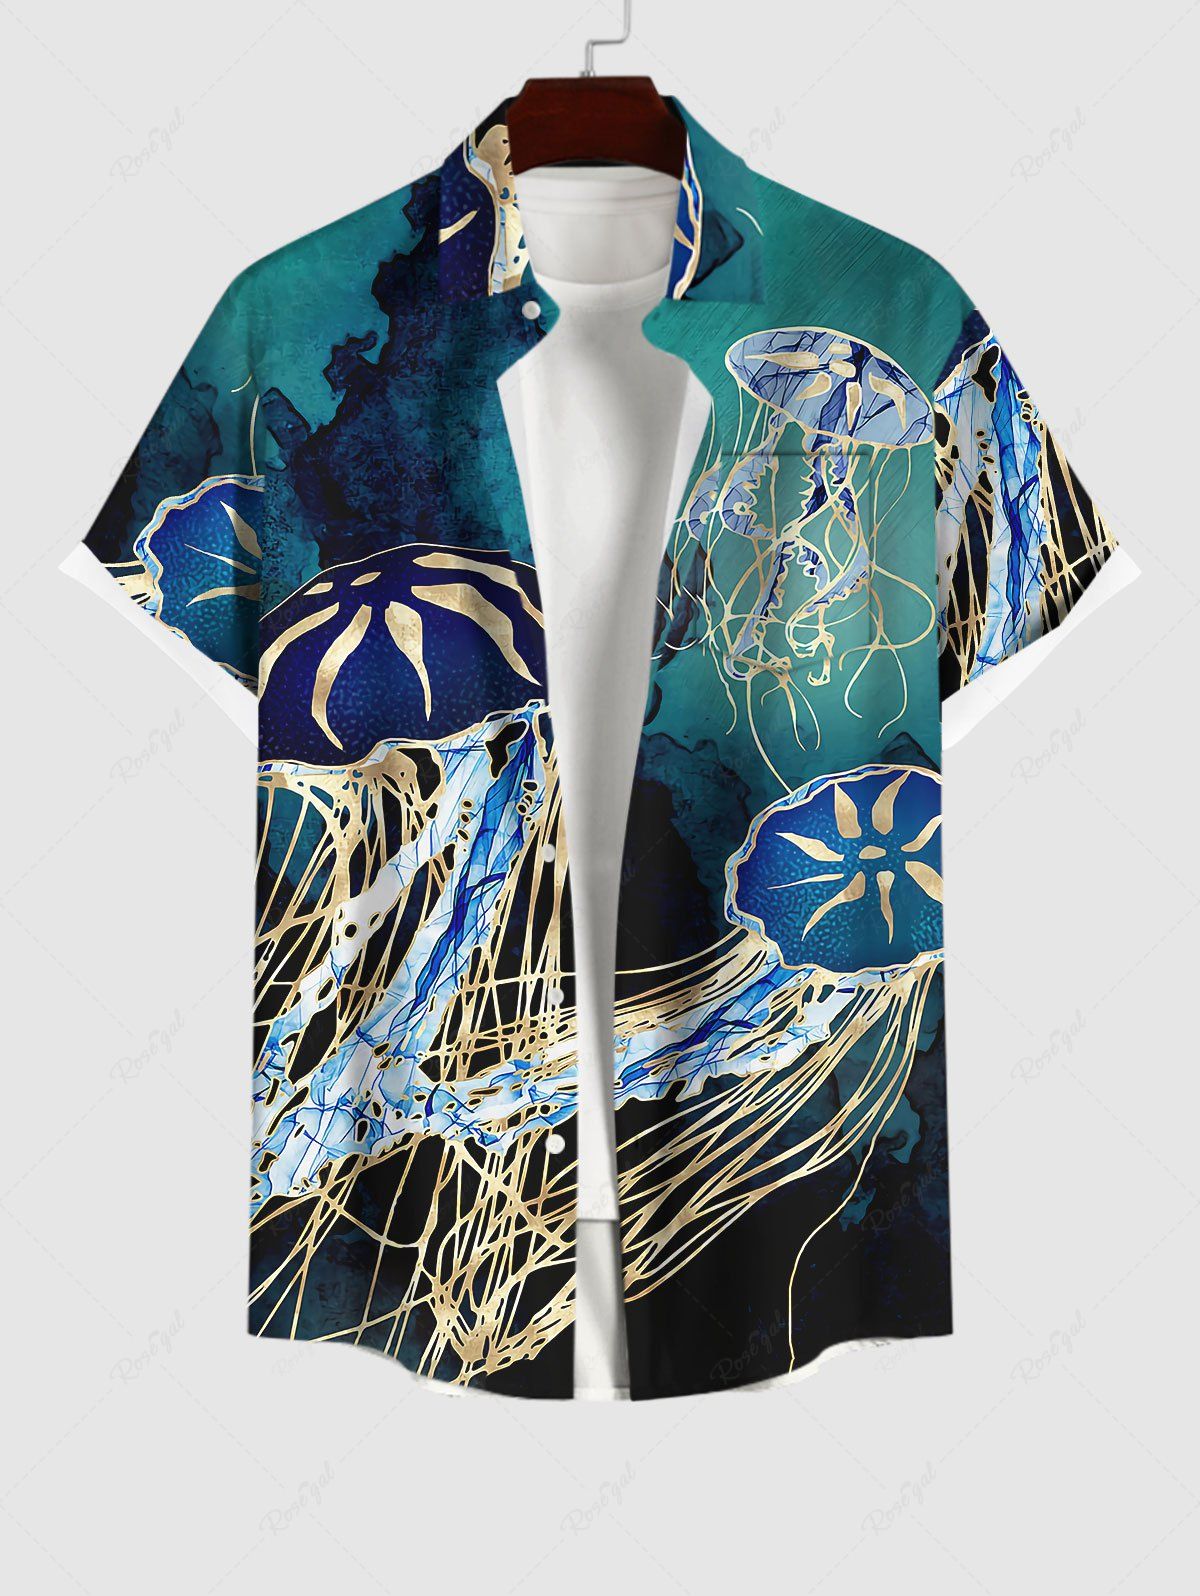 Hawaii Plus Size Sea Creatures Underwater World Jellyfish Print Buttons Pocket Shirt For Men Multi-A 3XL